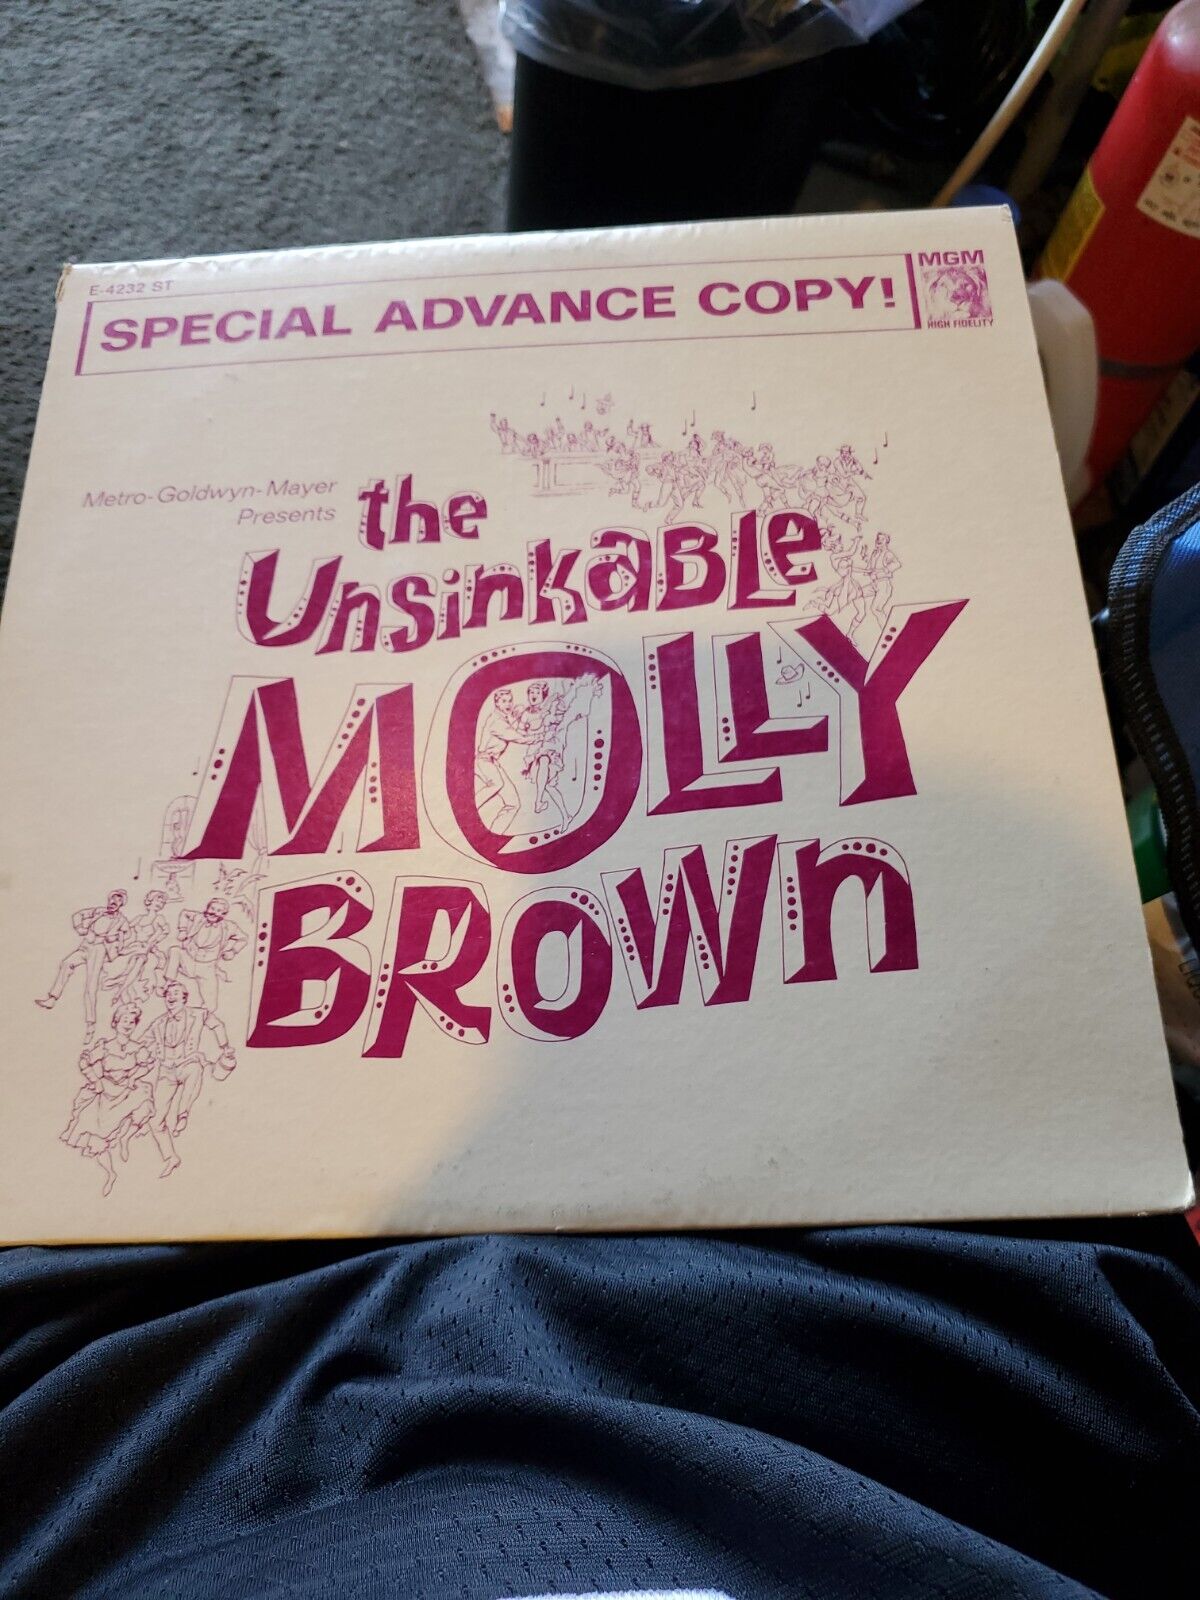 Unsinkable molly brown mgm advance copy Super rare vintage White Label Looks New